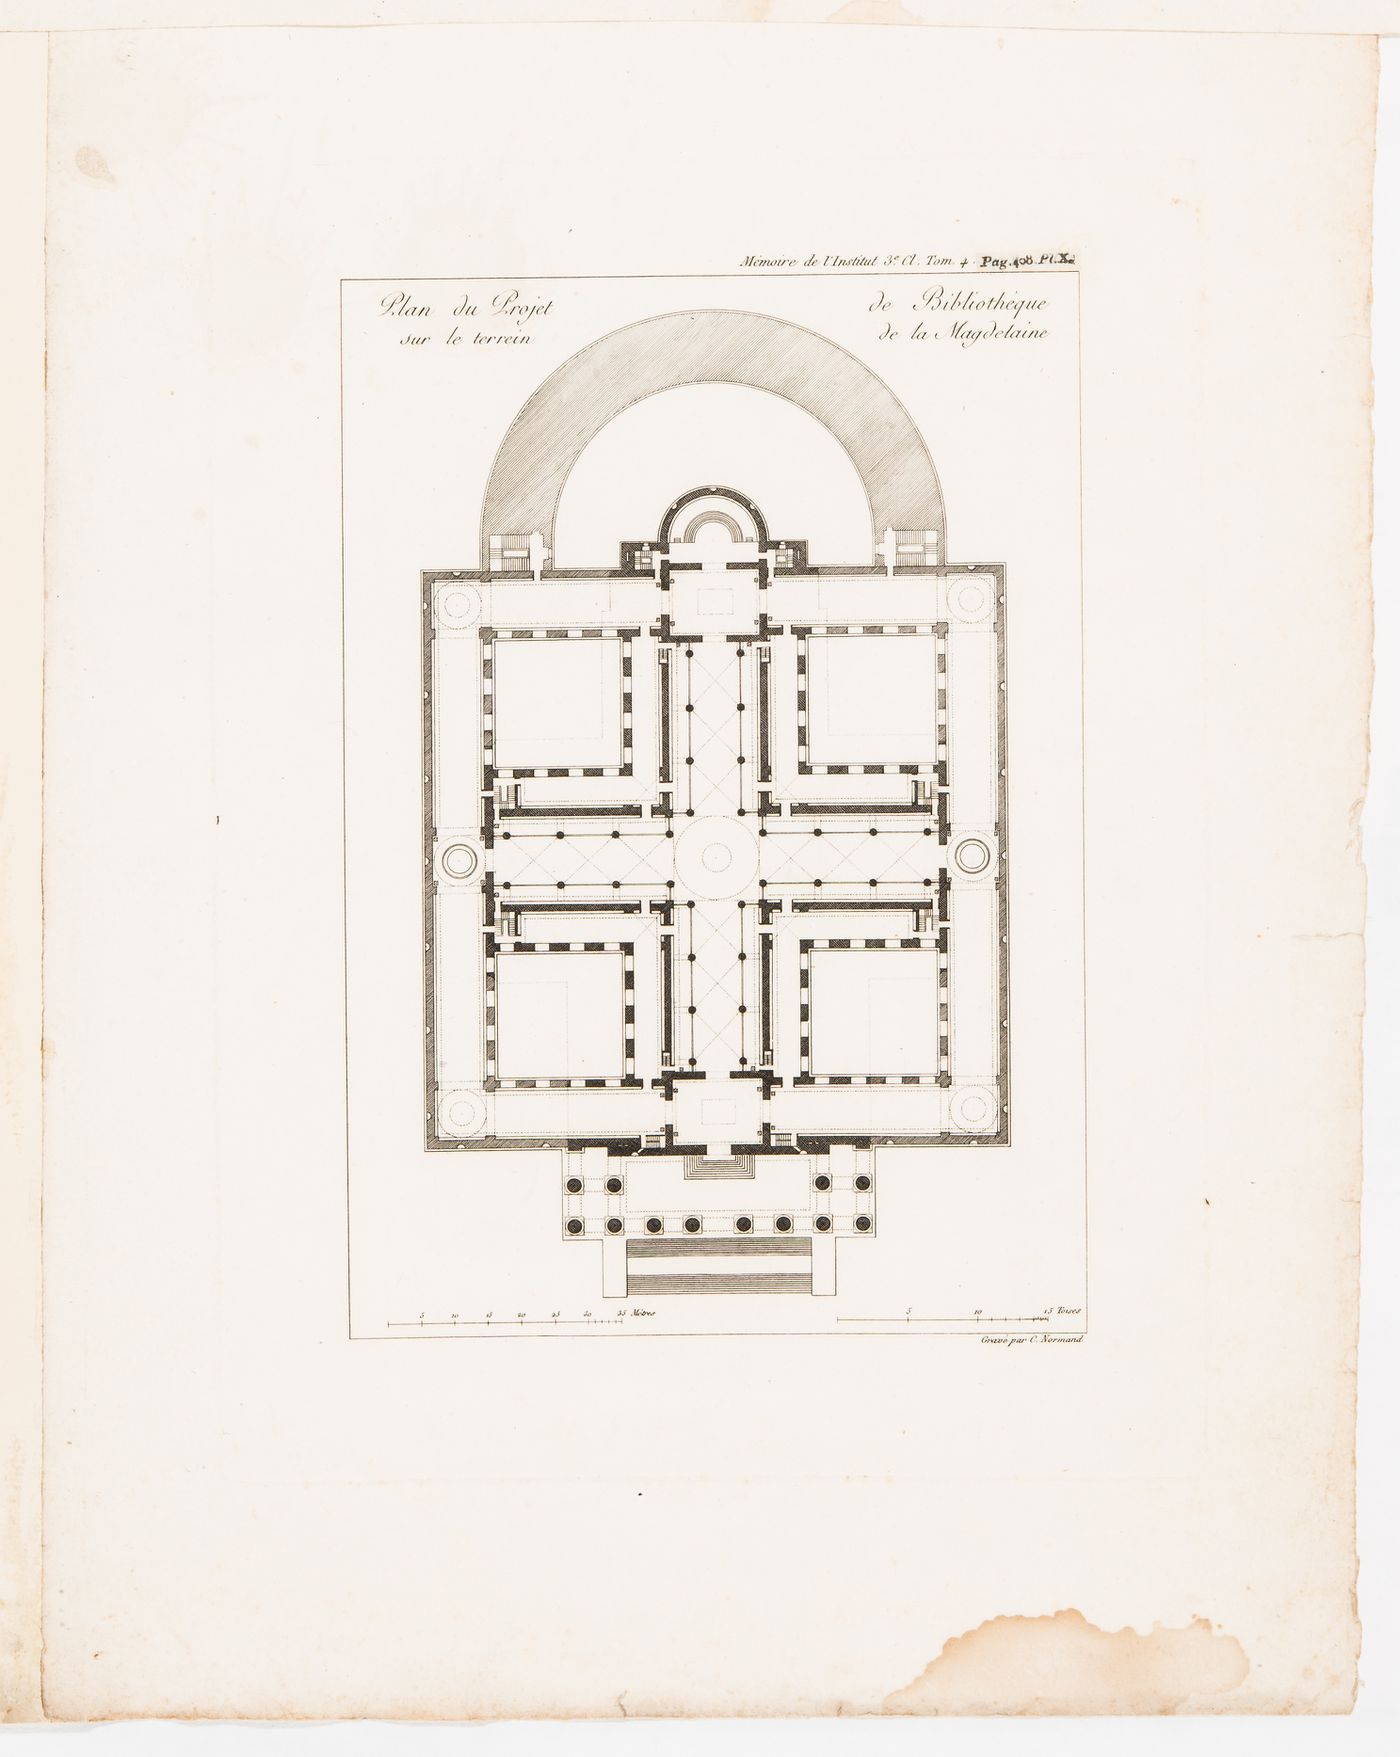 Library on the site of the Magdelaine: Plan